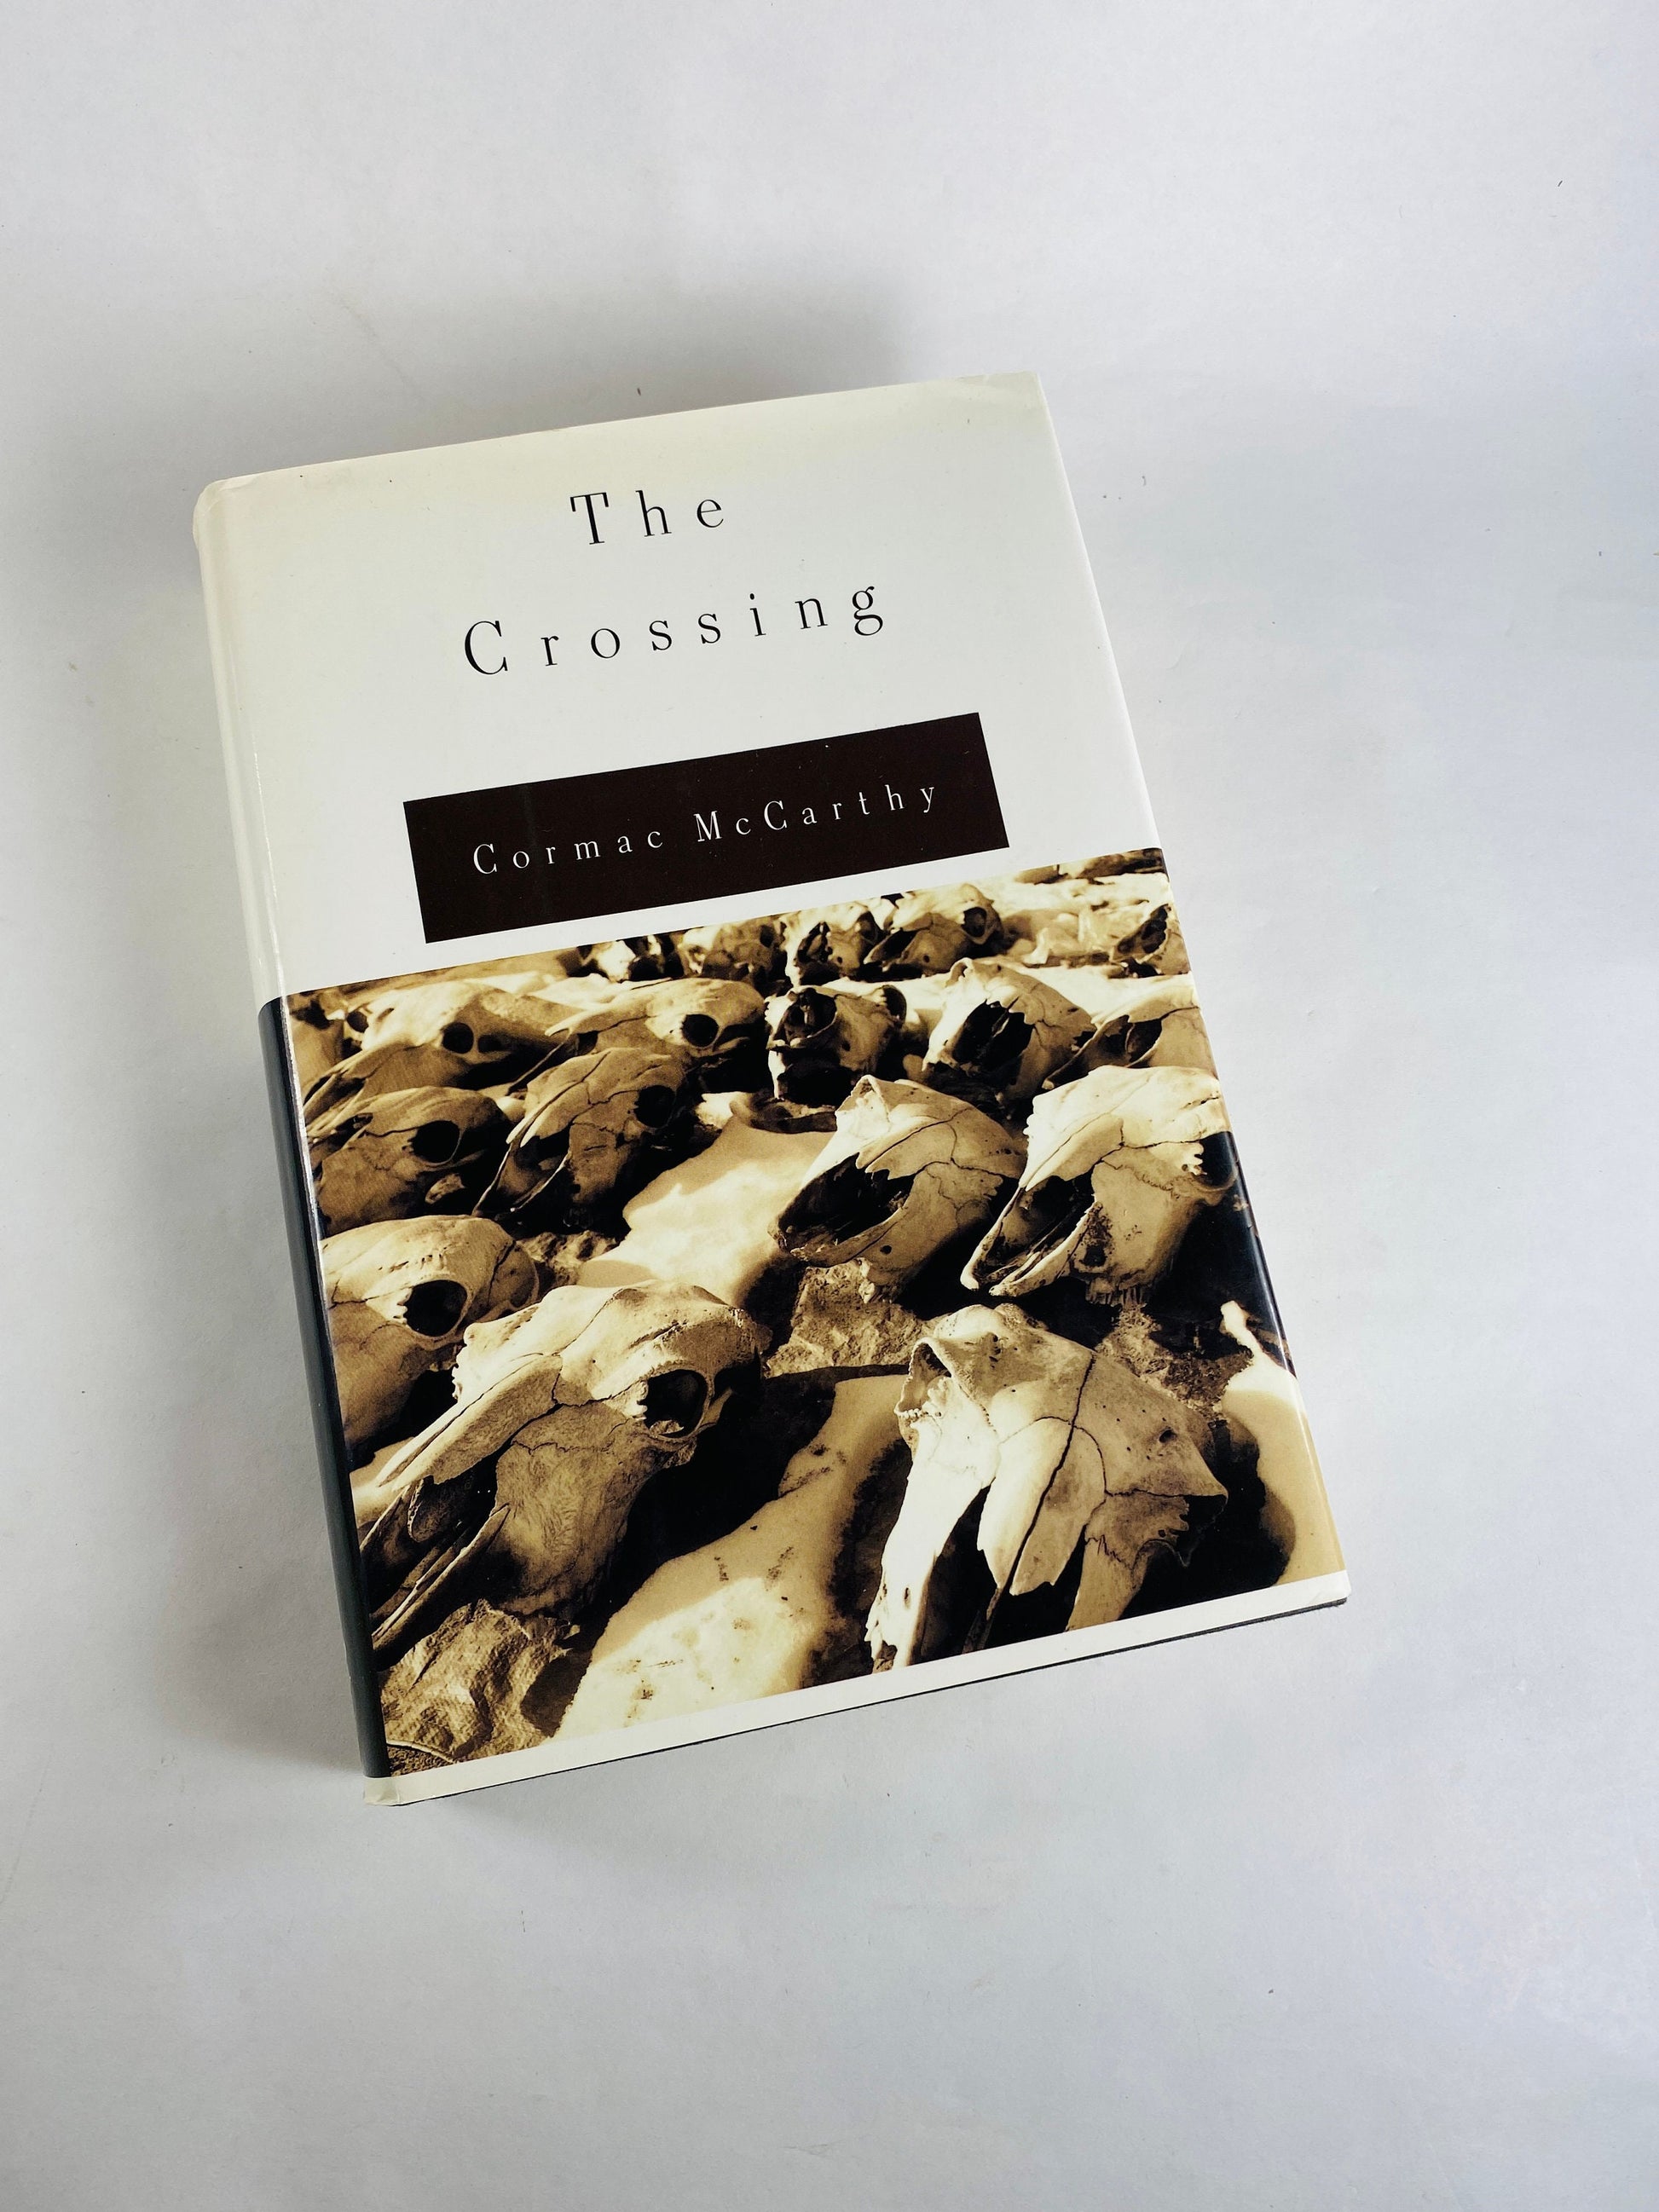 The Crossing by Cormac McCarthy Vintage book volume two of the Border Trilogy. Author of All the Pretty Horses and No Country For Old Men